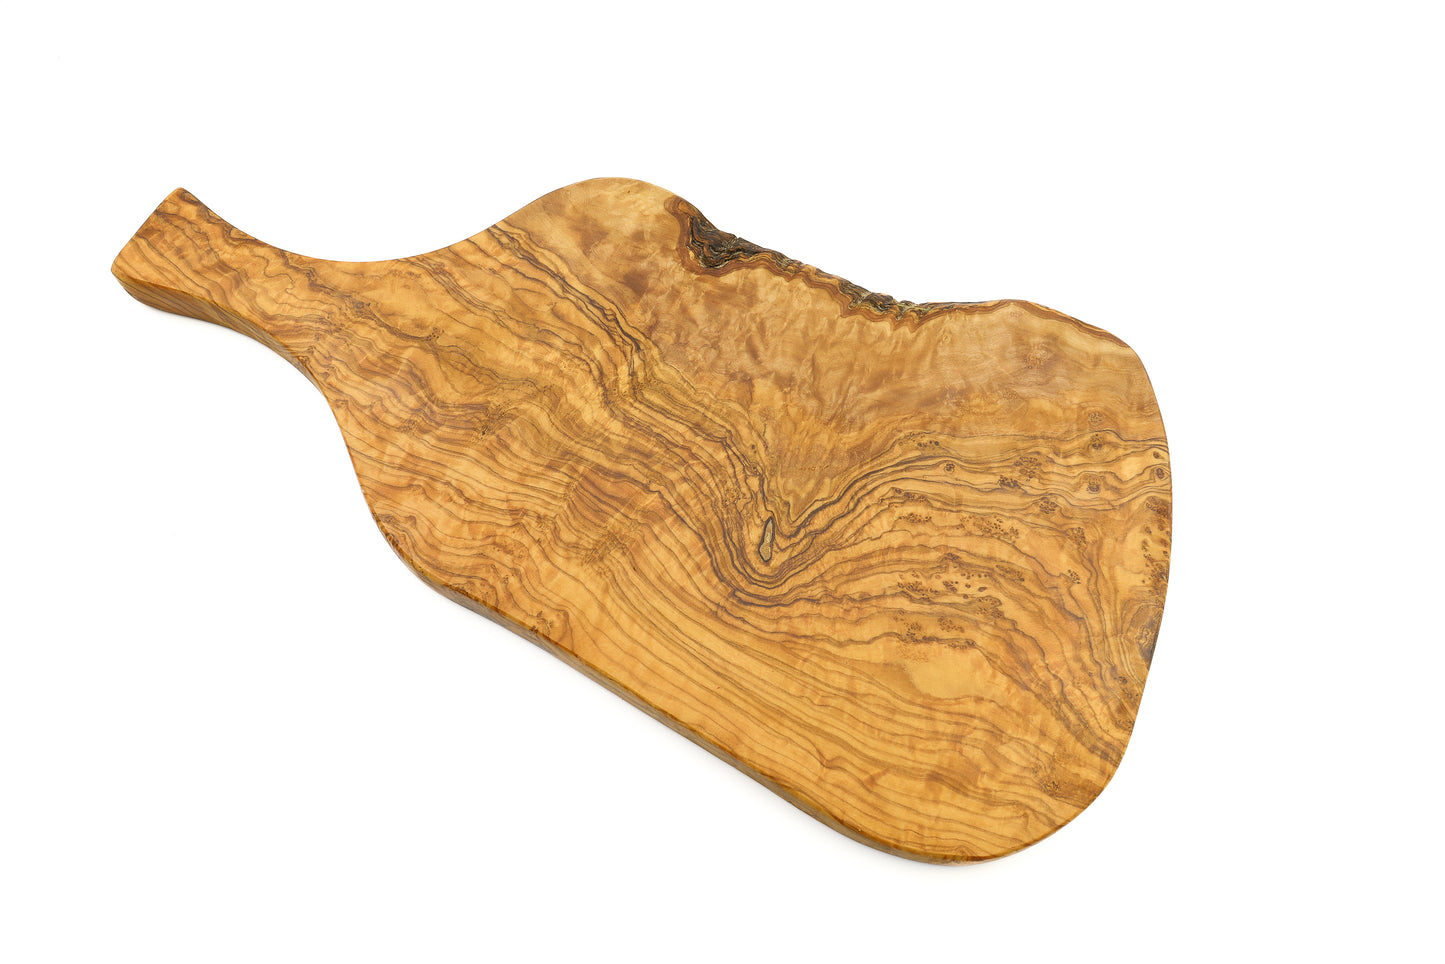 Eco-friendly cutting board made from olive wood, designed for creative cooking with its beef thigh shape and handle